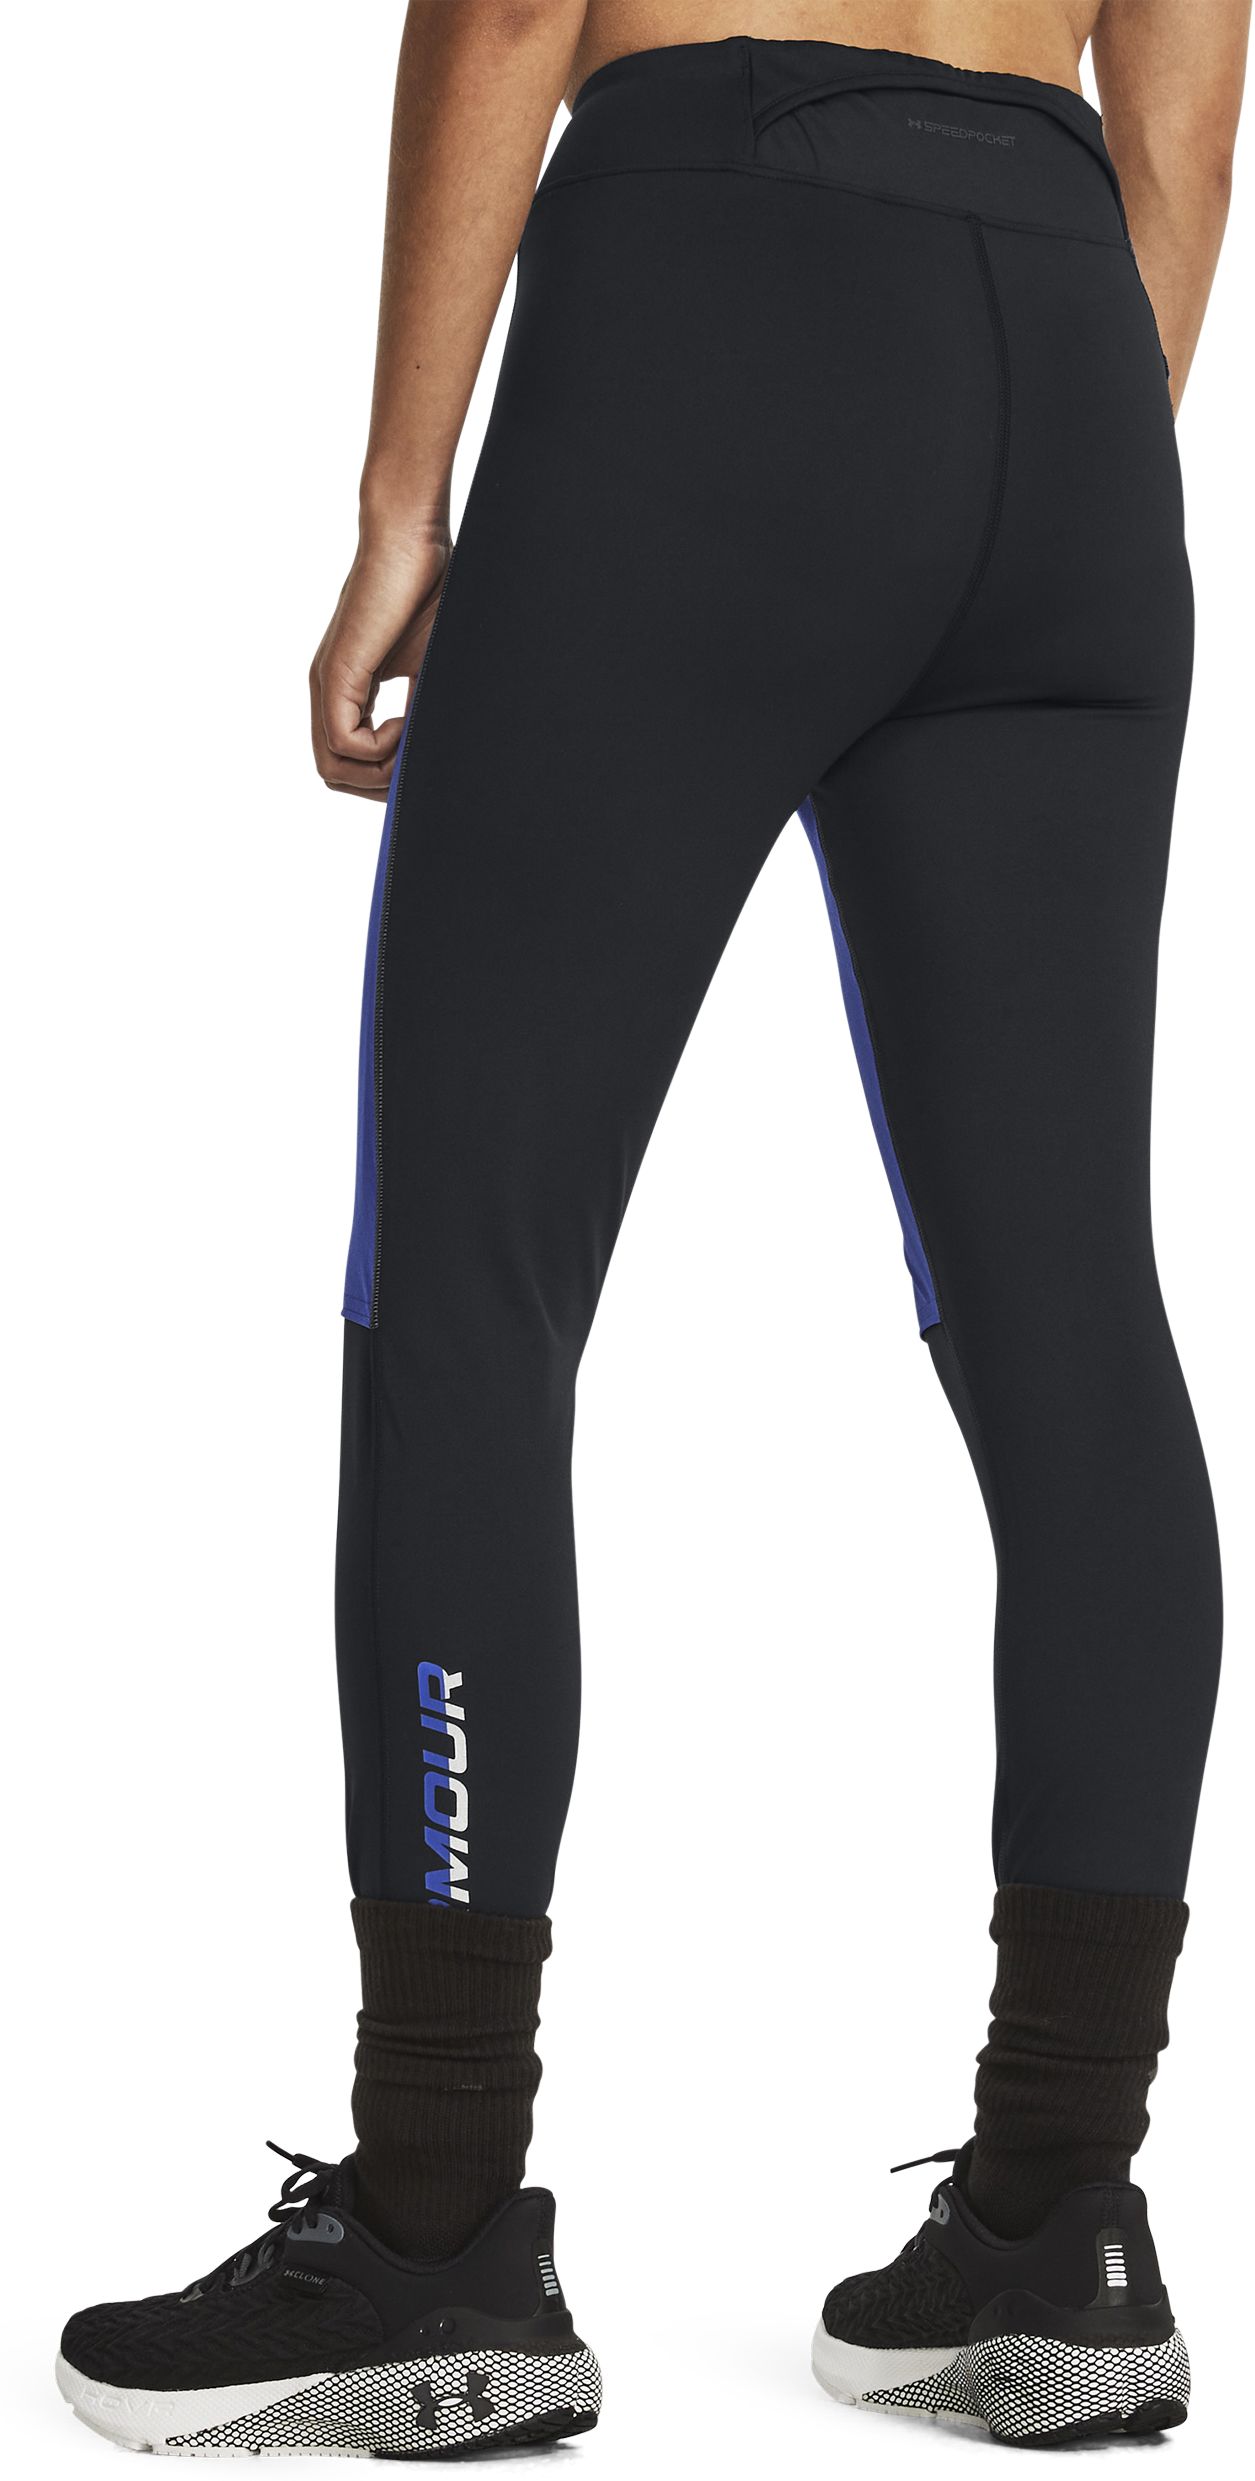 UNDER ARMOUR, UA Qualifier Cold Tight-BLK